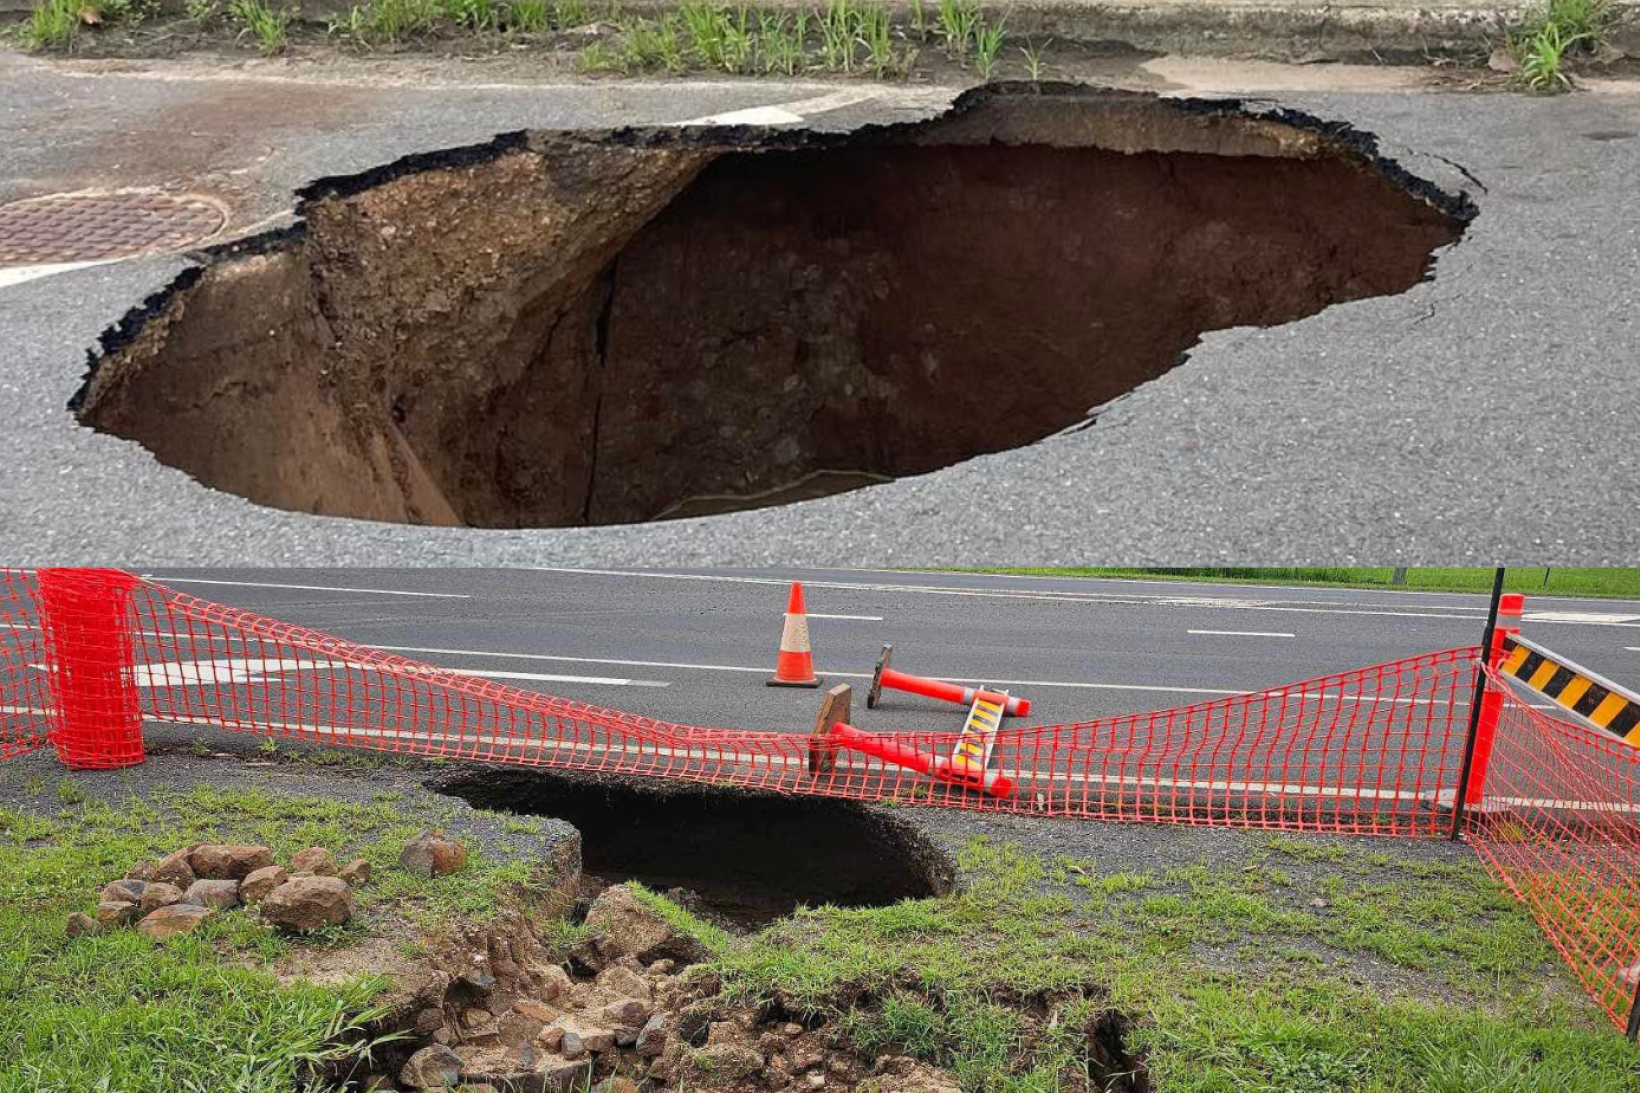 This sinkhole appeared near the Mareeba Hospital and was caused by a break in a sewer main.